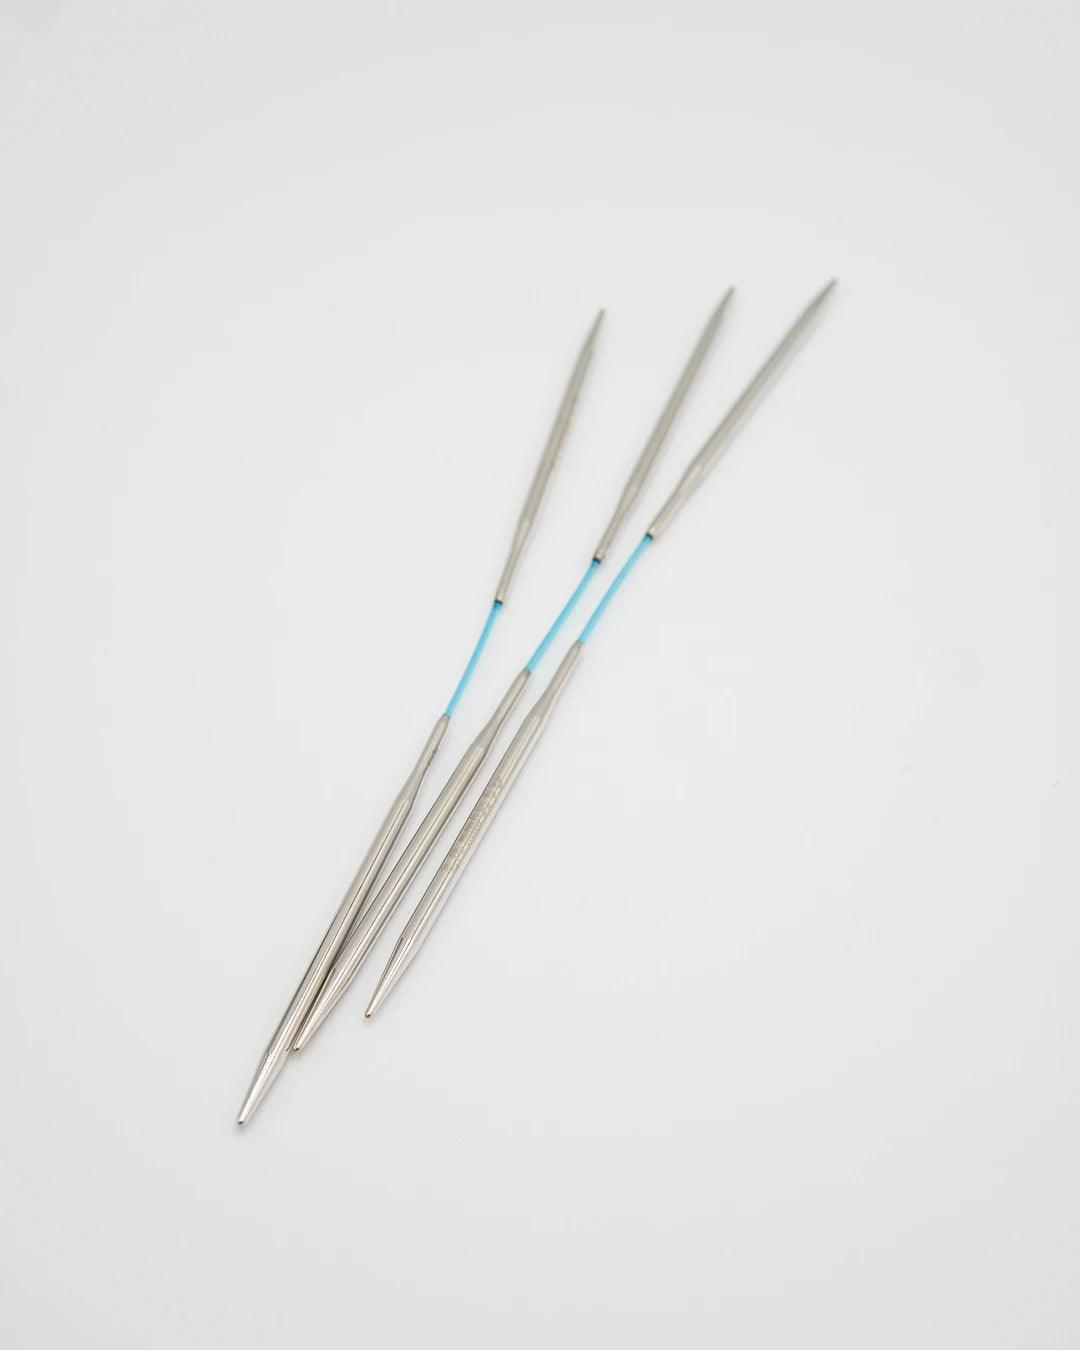 addi ® FlexiFlip Double Pointed Knitting Needles (Standard Length) - Aimee Sher Makes